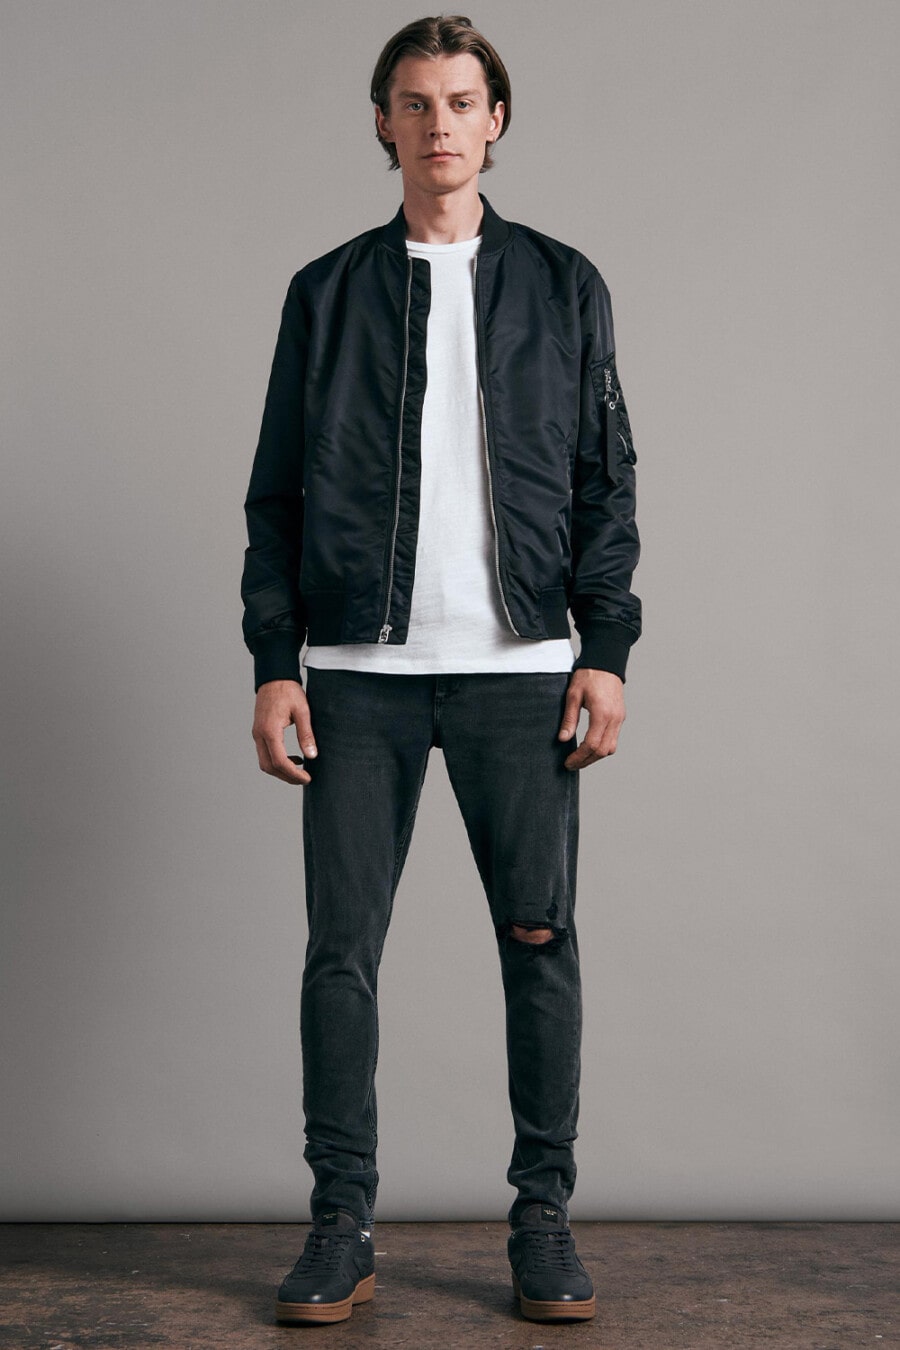 Men's black ripped jeans, white oversized T-shirt, black bomber jacket and black gum sole sneakers outfit